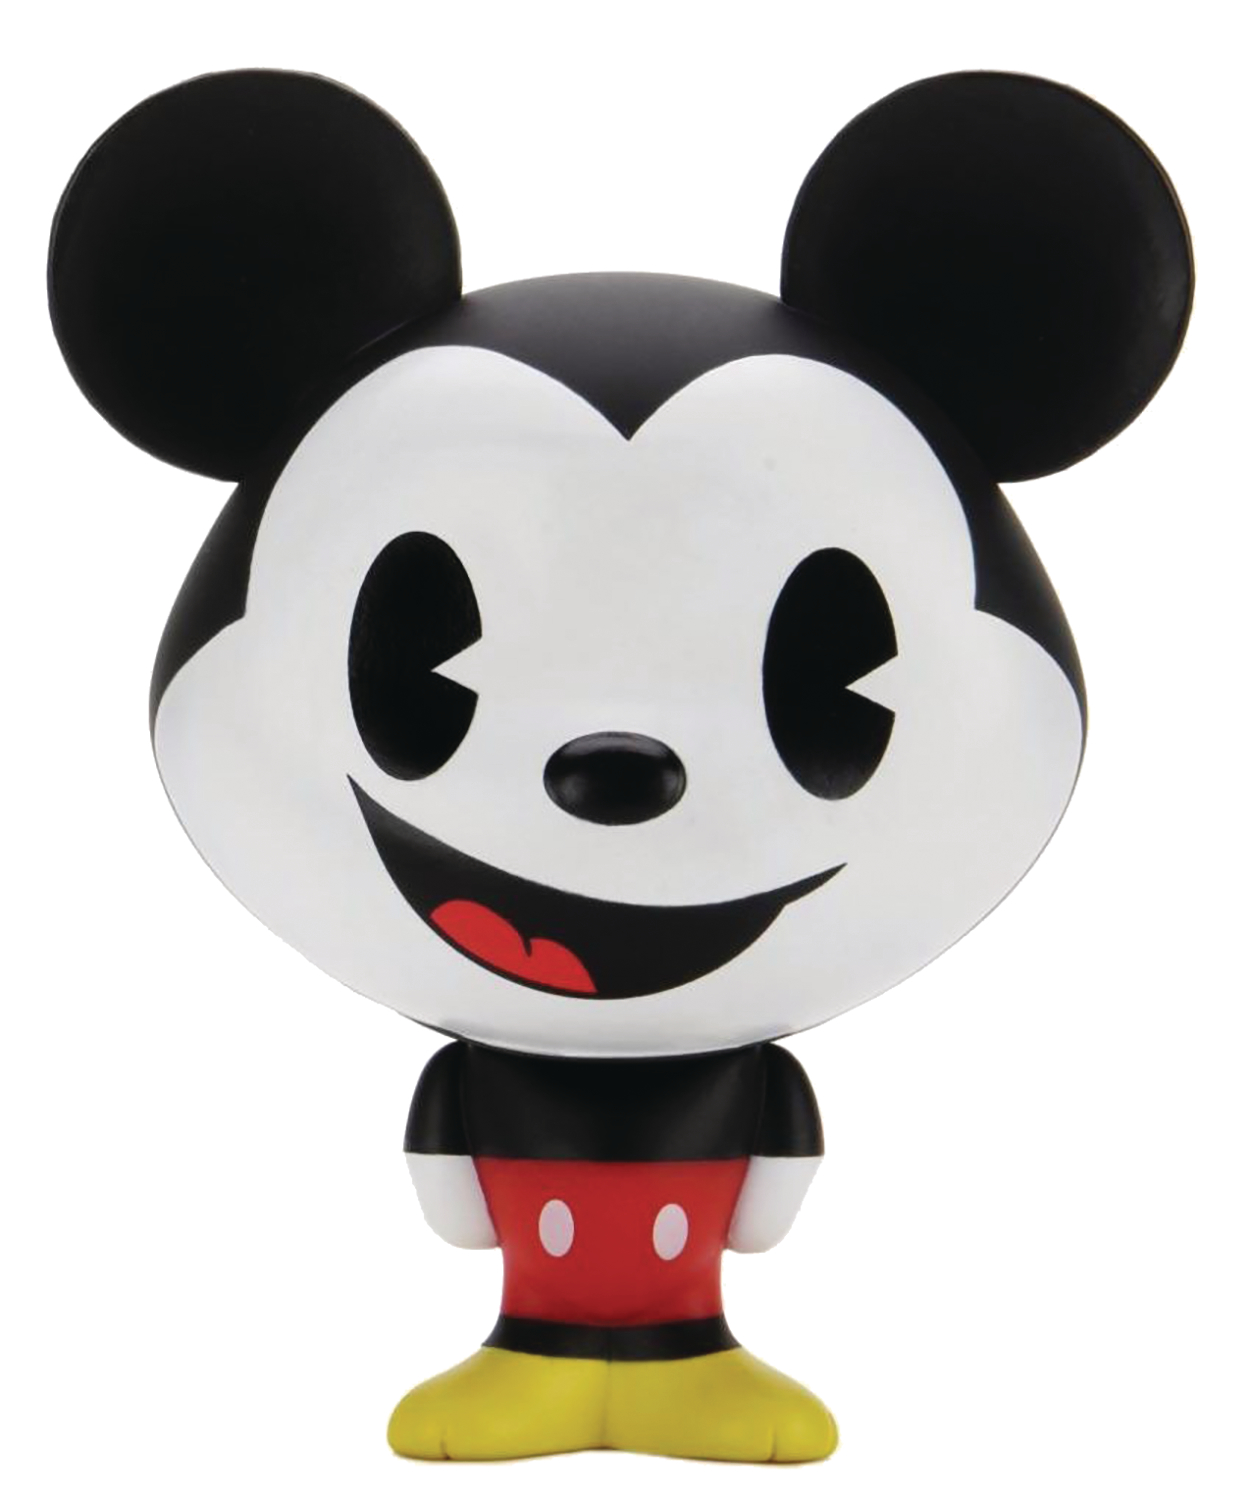 Bhunny Mickey Mouse 4 Inch Stylized Figure